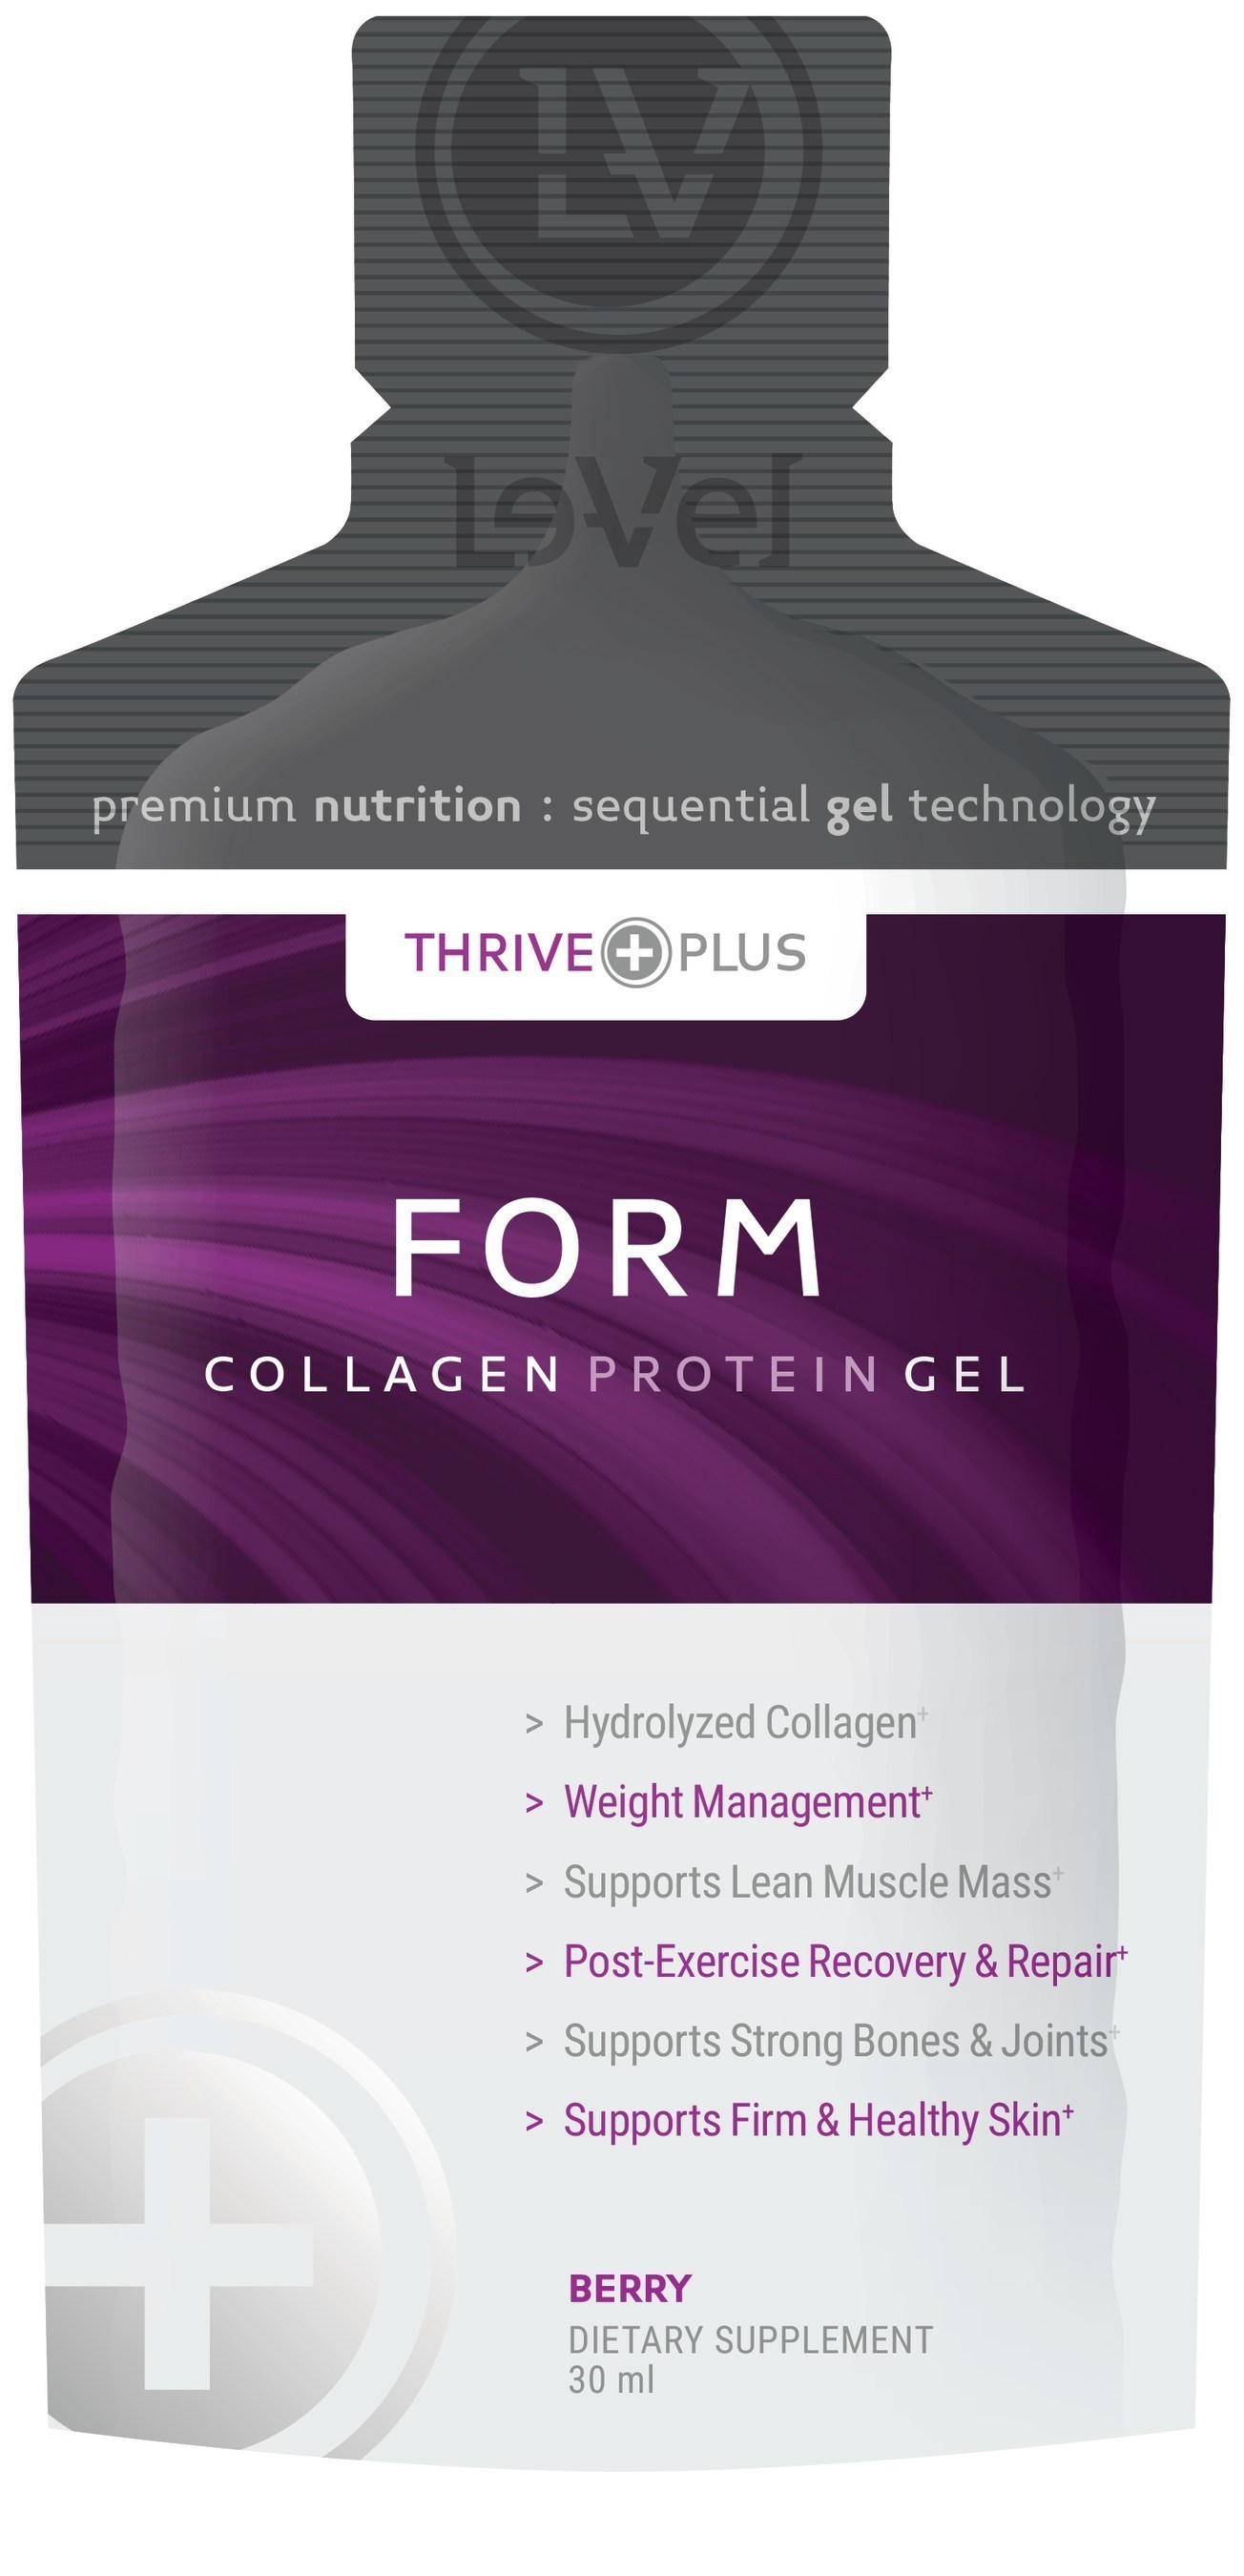 FORM: The world's first sequentially absorbed hydrolyzed collagen protein.